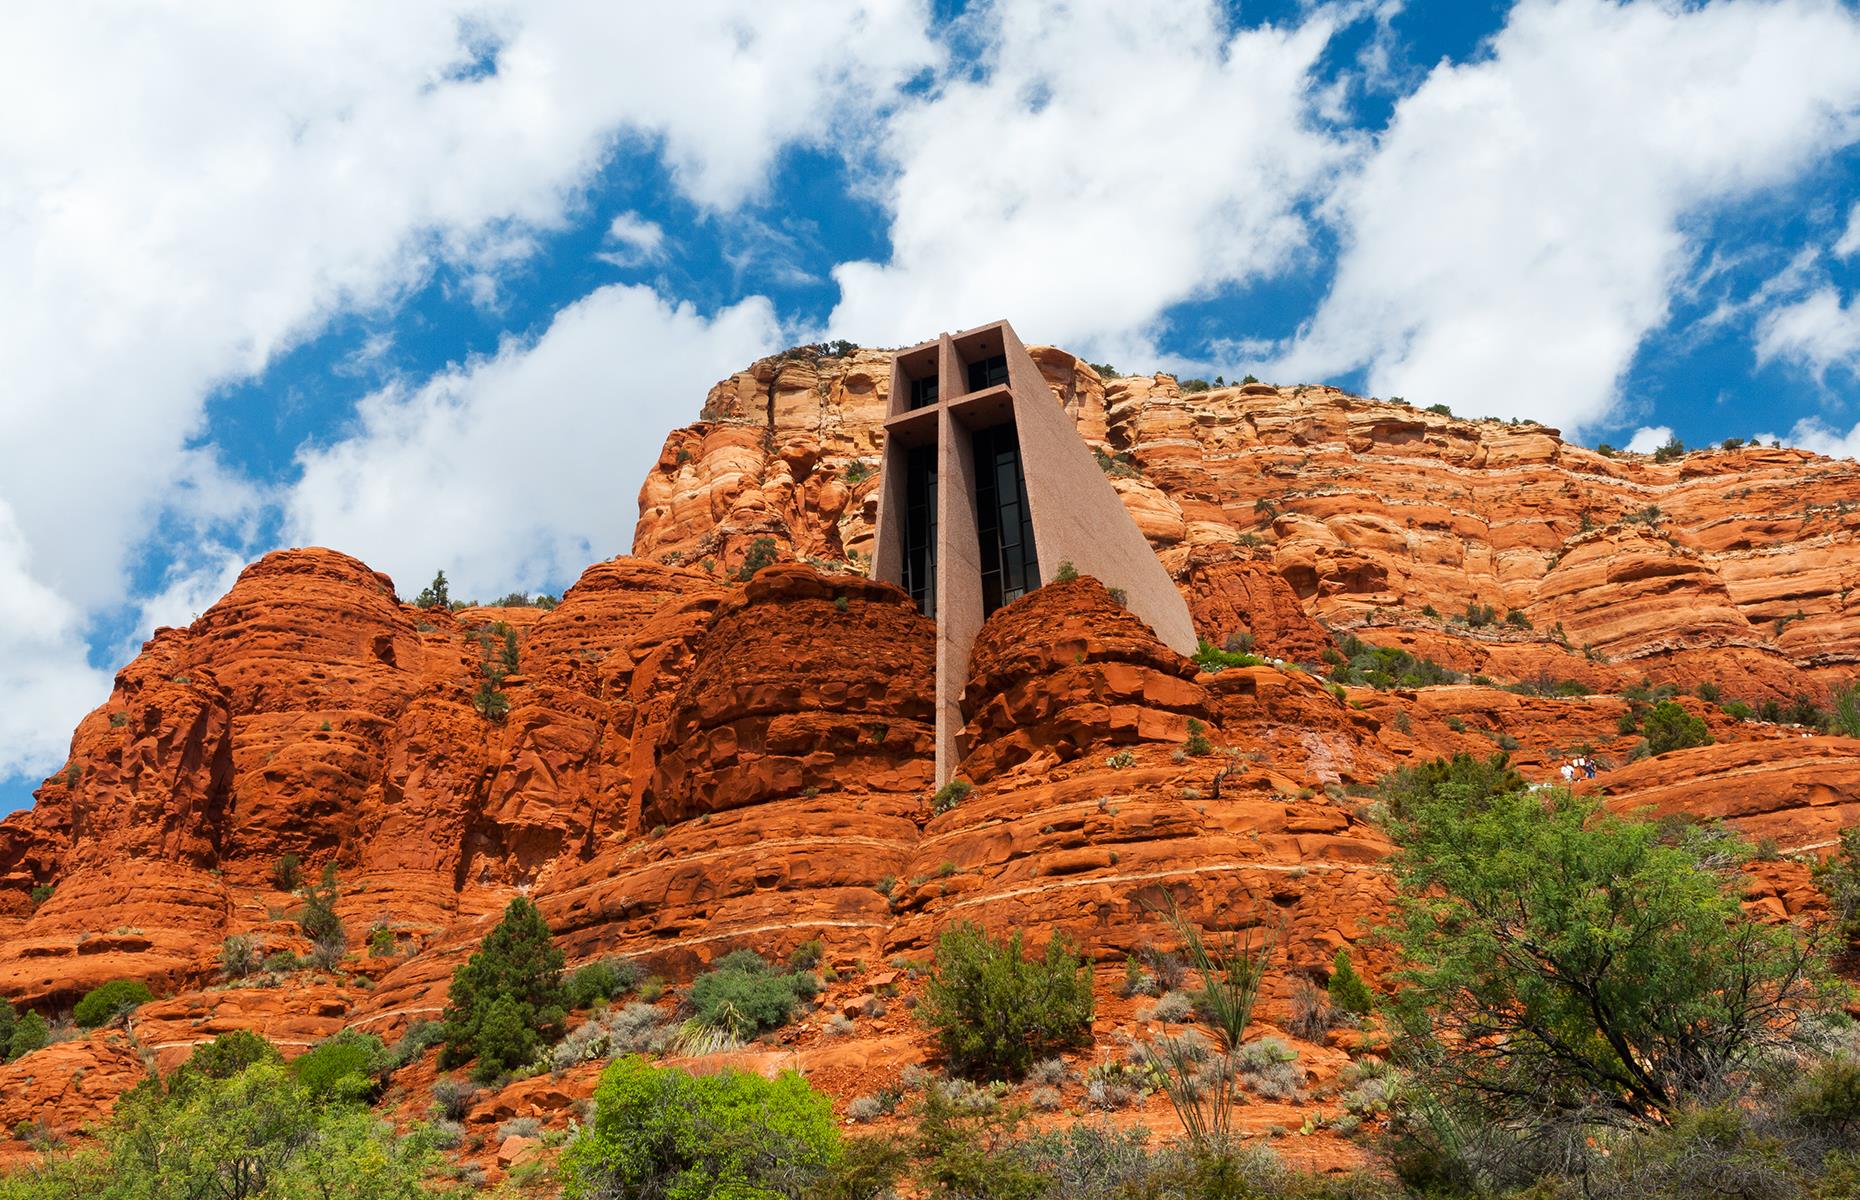 <p>Blending into the surrounding red rocks, this chapel was built in 1956 by visionary architect and sculptor Marguerite Brunswig Staude. It was designed to reflect the spiritual essence of the Sedona landscape. Staude was inspired by the powerful steel frameworks of skyscrapers – a theme that's explored with its central iron cross, which serves both a structural support and aesthetic purpose. The striking design is rounded off with a 210-foot-tall (64m) central nave and windowed altar.</p>  <p><strong><a href="https://www.facebook.com/loveexploringUK?utm_source=msn&utm_medium=social&utm_campaign=front">Love this? Follow us on Facebook for more travel inspiration</a></strong></p>